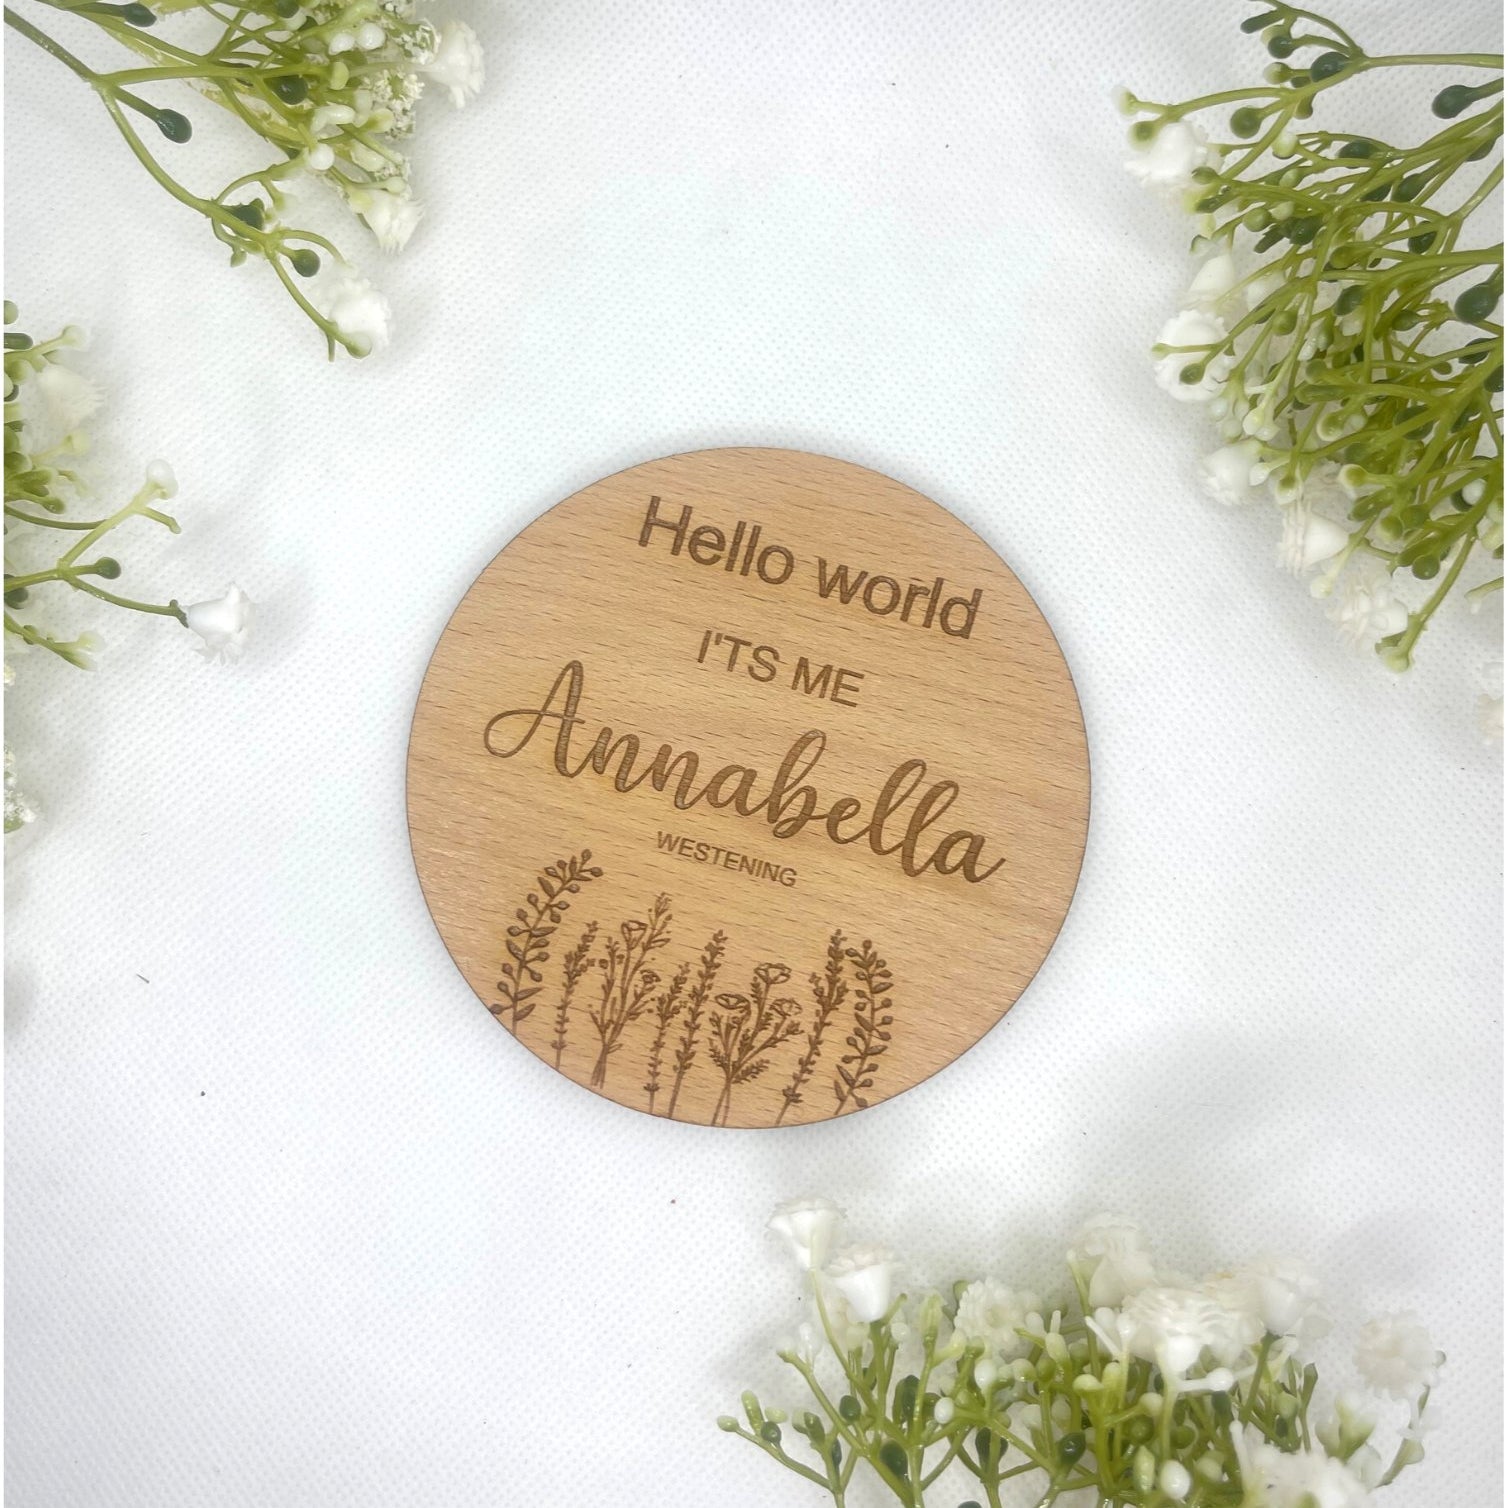 Baby announcement. Personalise your plaque with your baby's first middle & last name as shown. This would make the perfect first gift for new parents.  Made from: Oak veneer  SIZE: 10x10cm or 15x15cm (approx)   Thickness: 4mm  Not intended to be used by children. Adult supervision is required. 